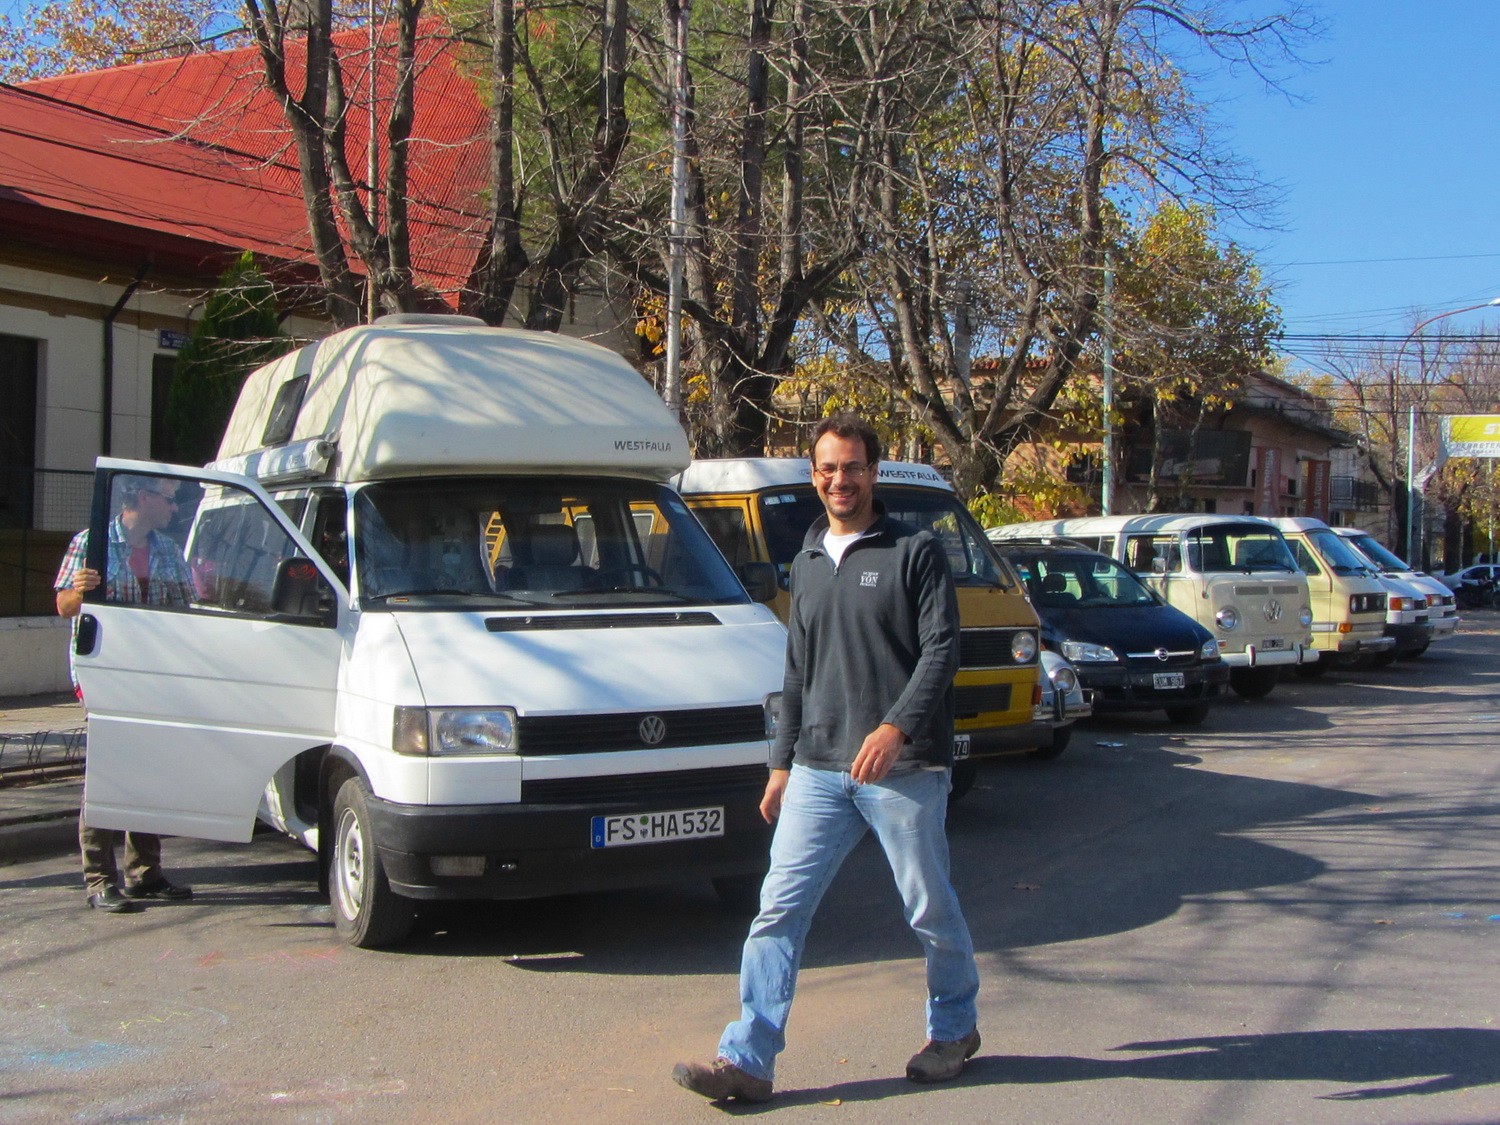 Our friend Cristian with a lot of Volkswagen campers